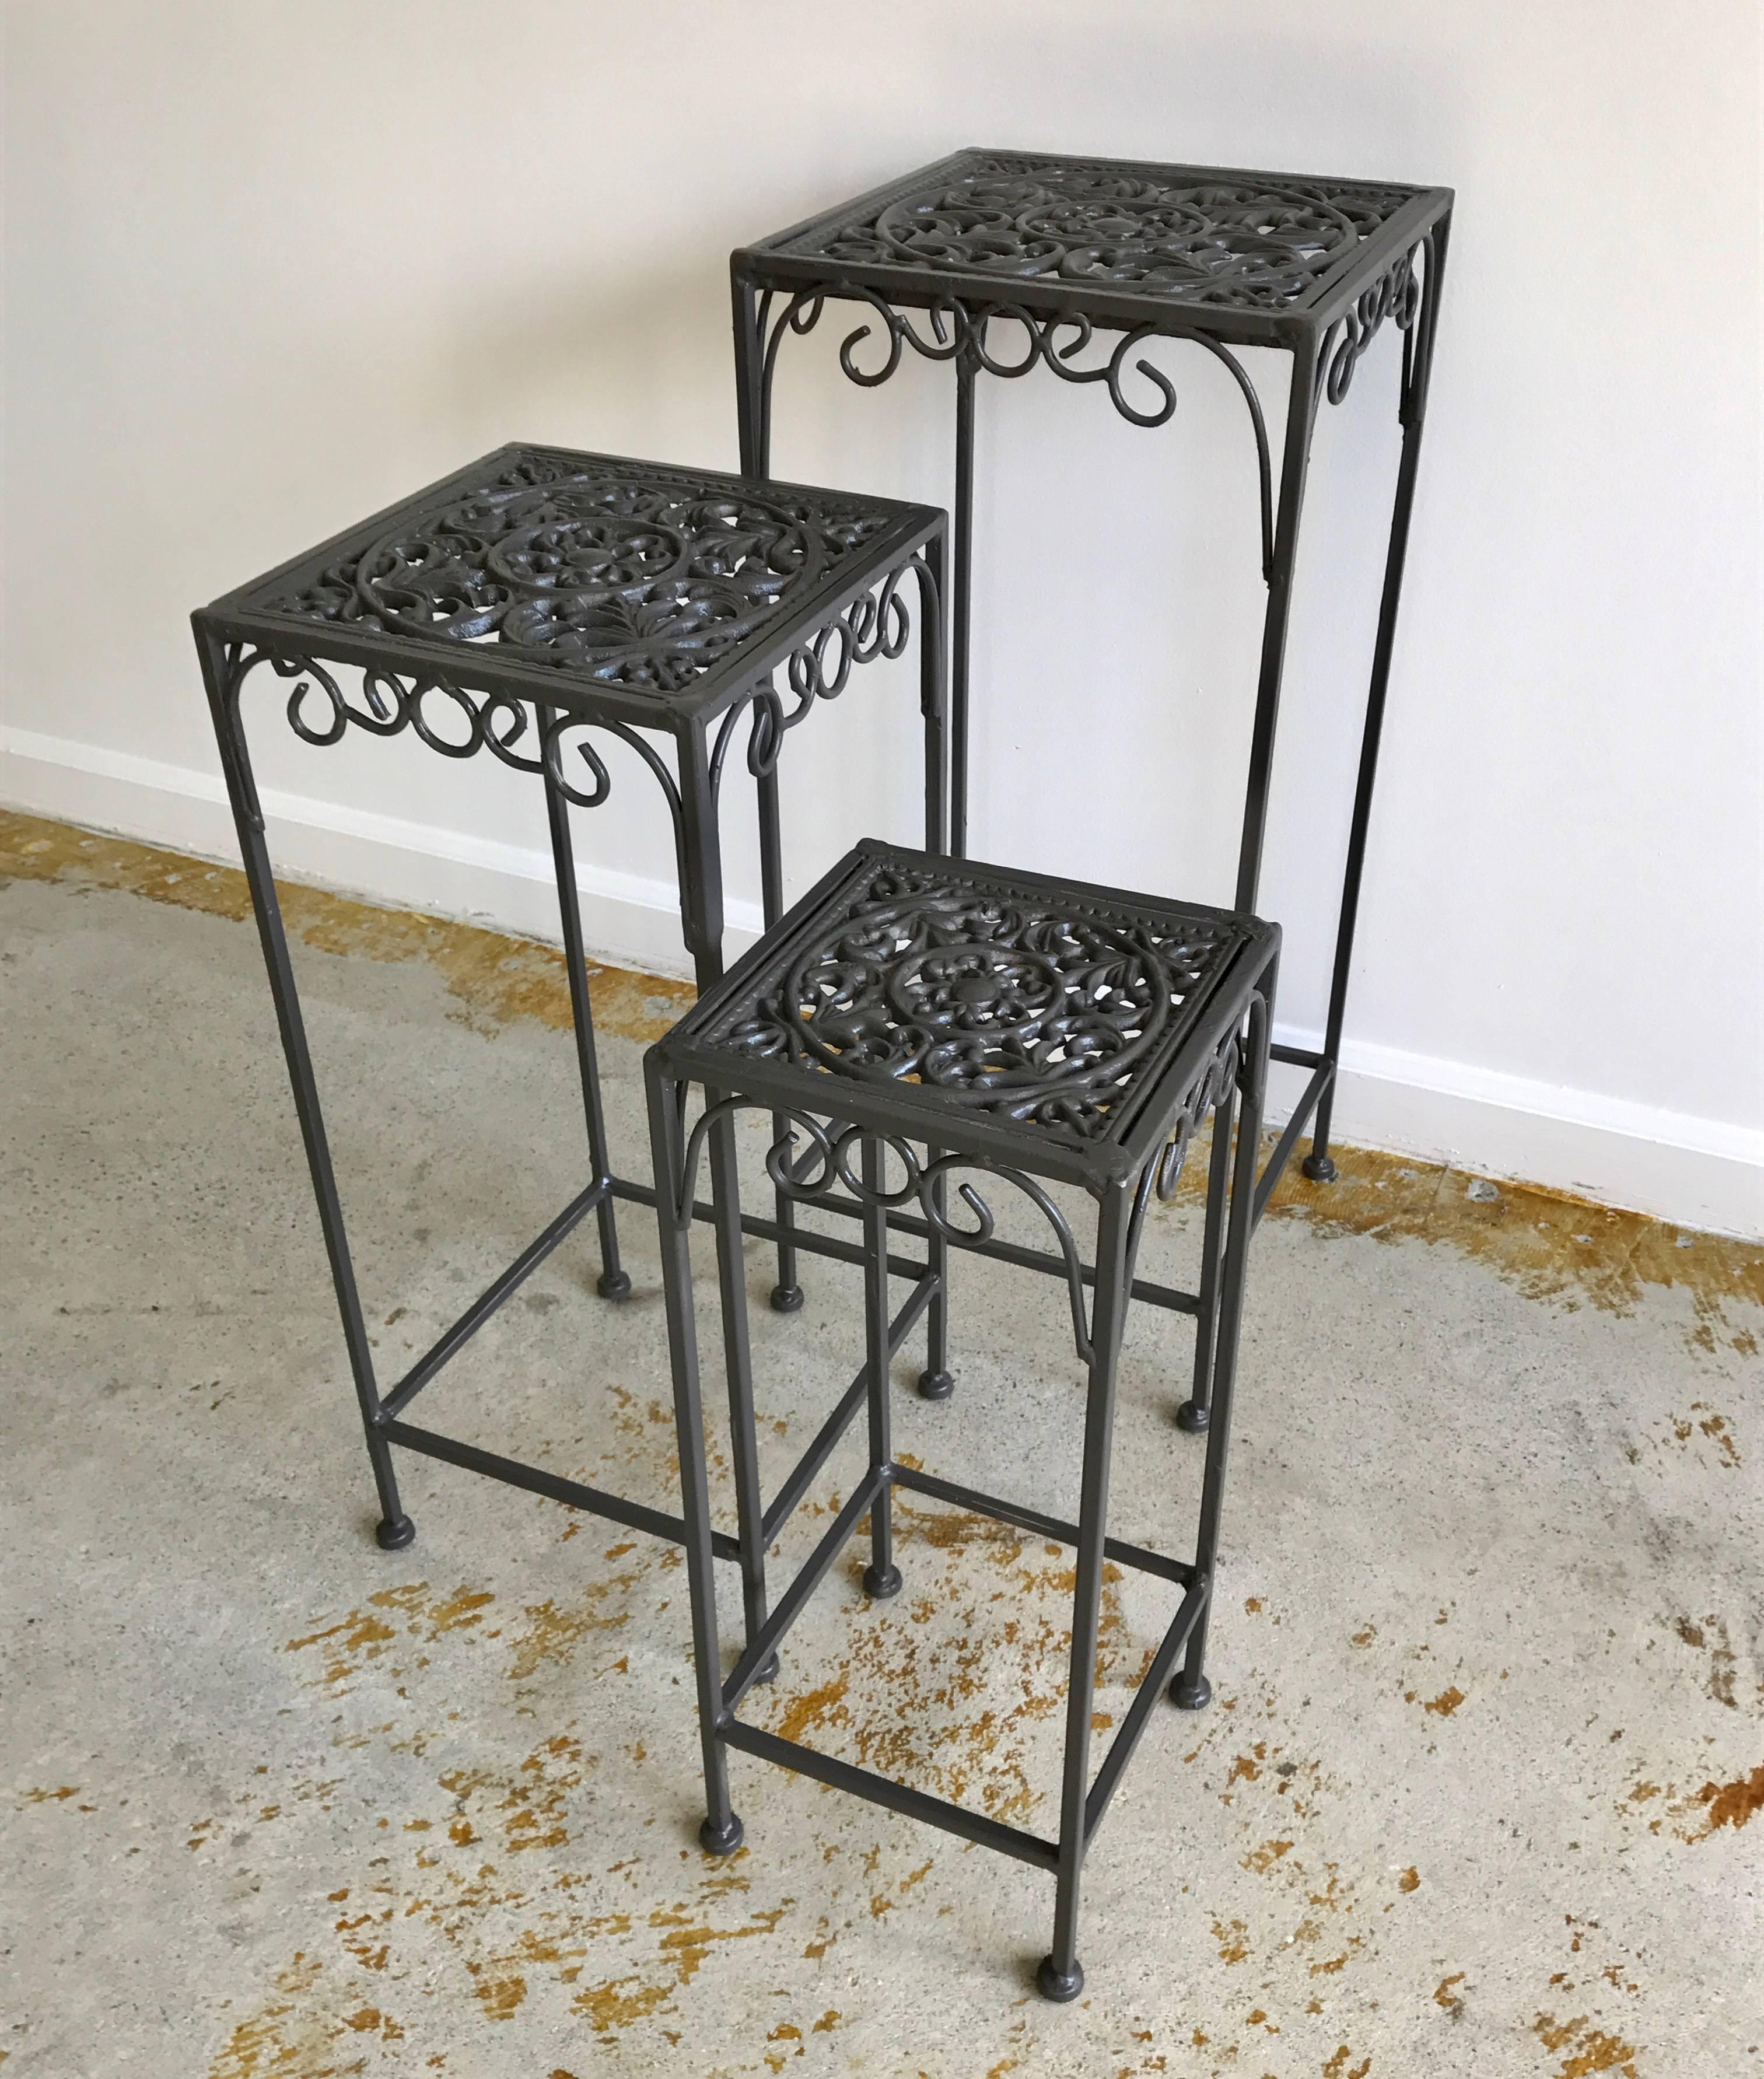 Great set of three cast iron nesting tables for your garden, patio or sun room, freshly painted, anodized bronze.

Measures: large 12 x 12 x 28
Medium 10.5 x 10.5 x 24
Small 8 x 8 x 20.